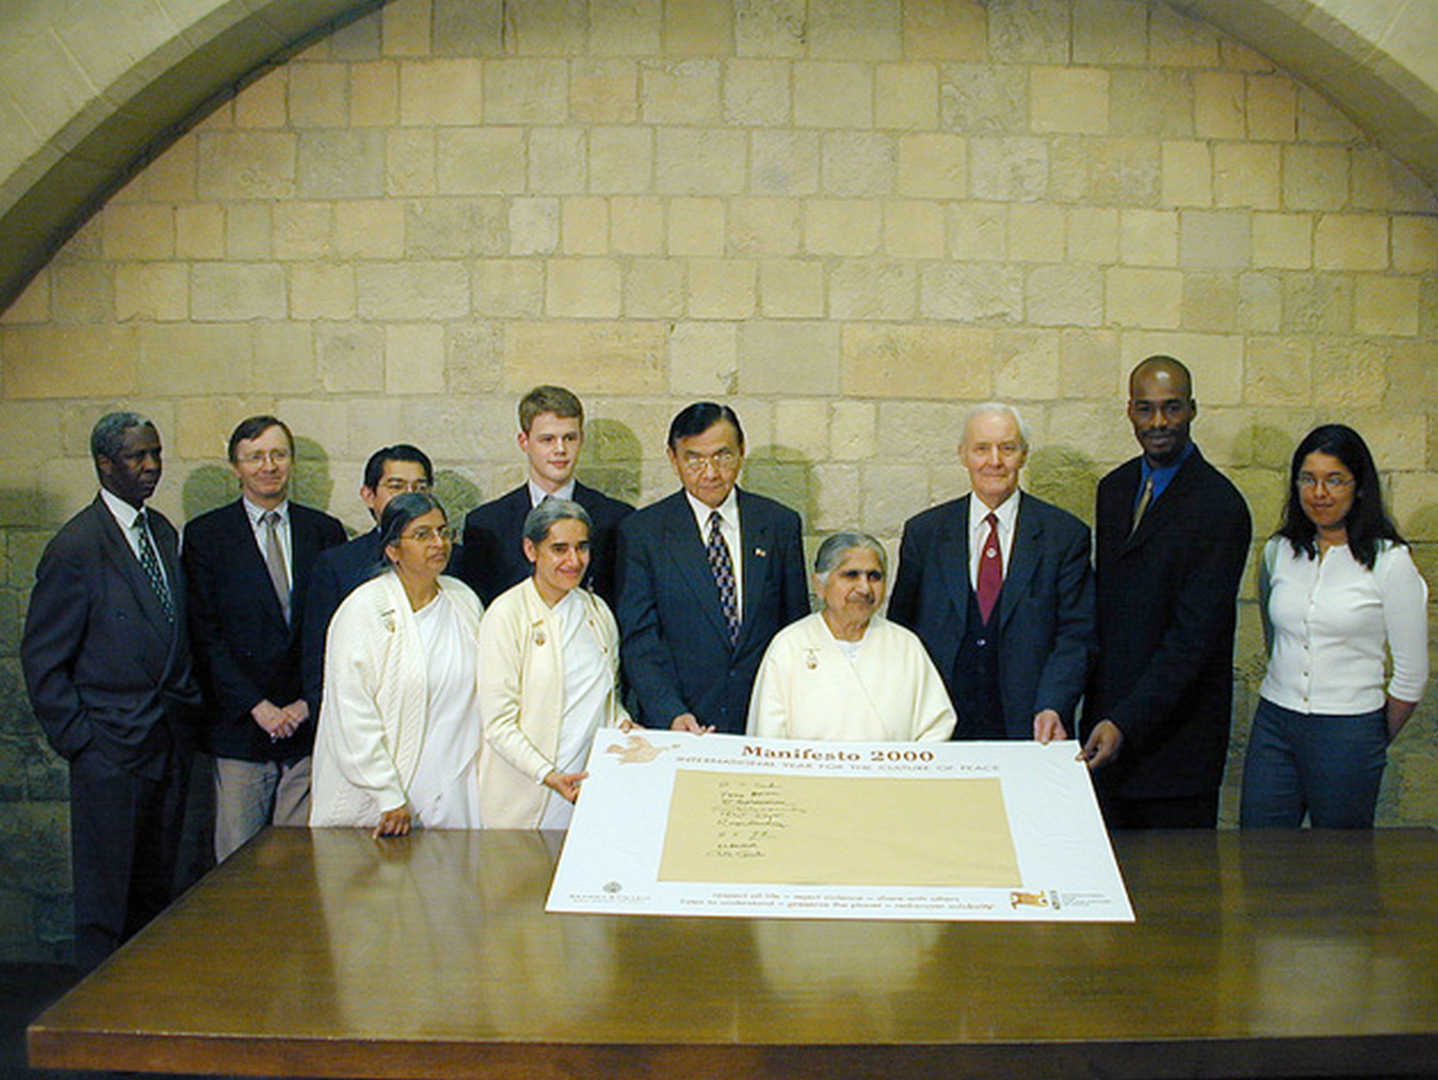 Dadi and dignitaries at the house of commons, london, at the launch of iycp in 2000